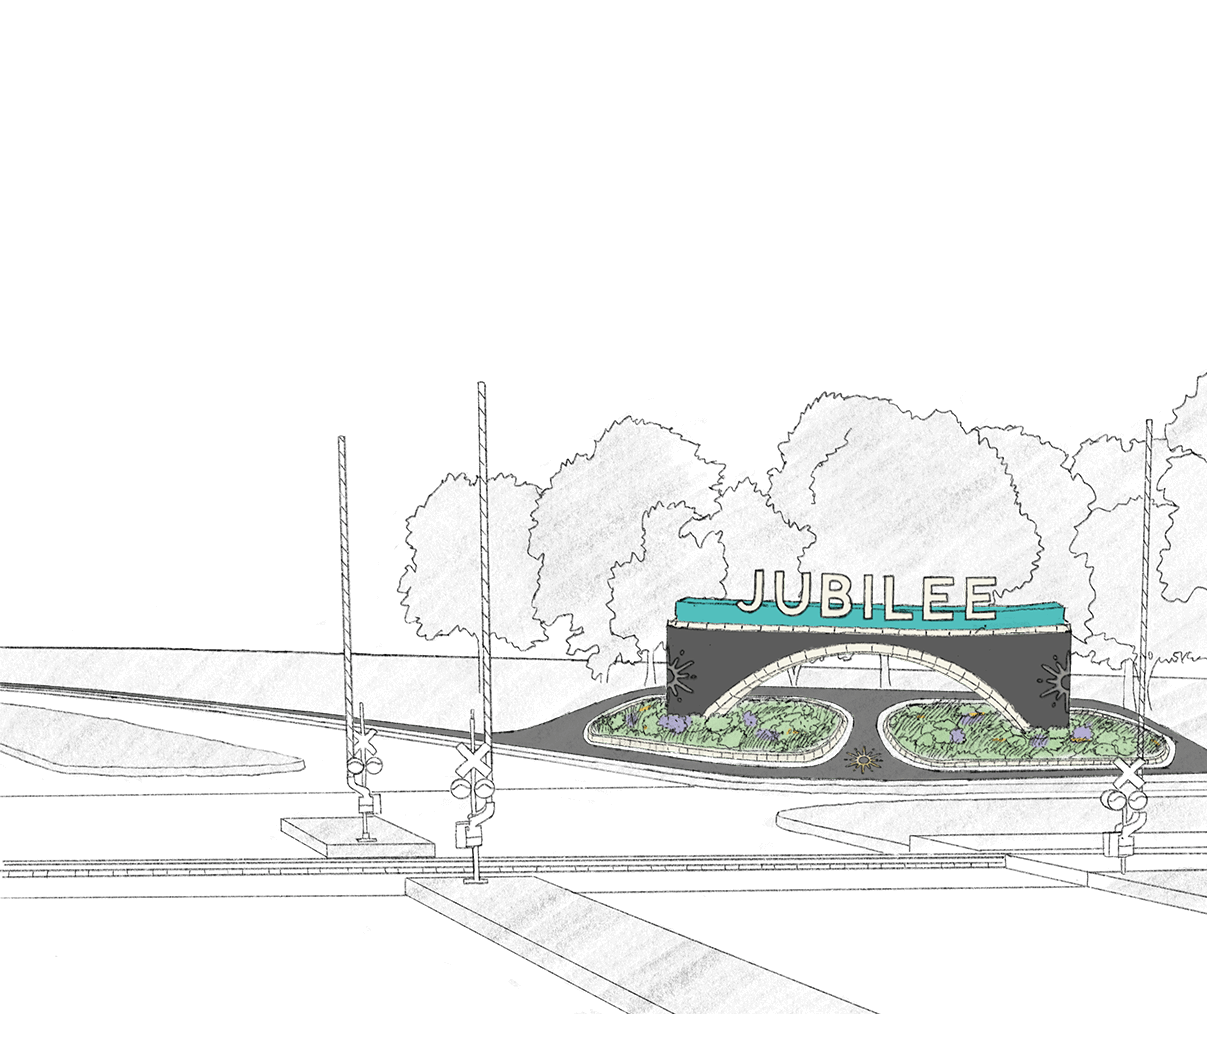 Rendering sketch of a signage concept for Jubilee